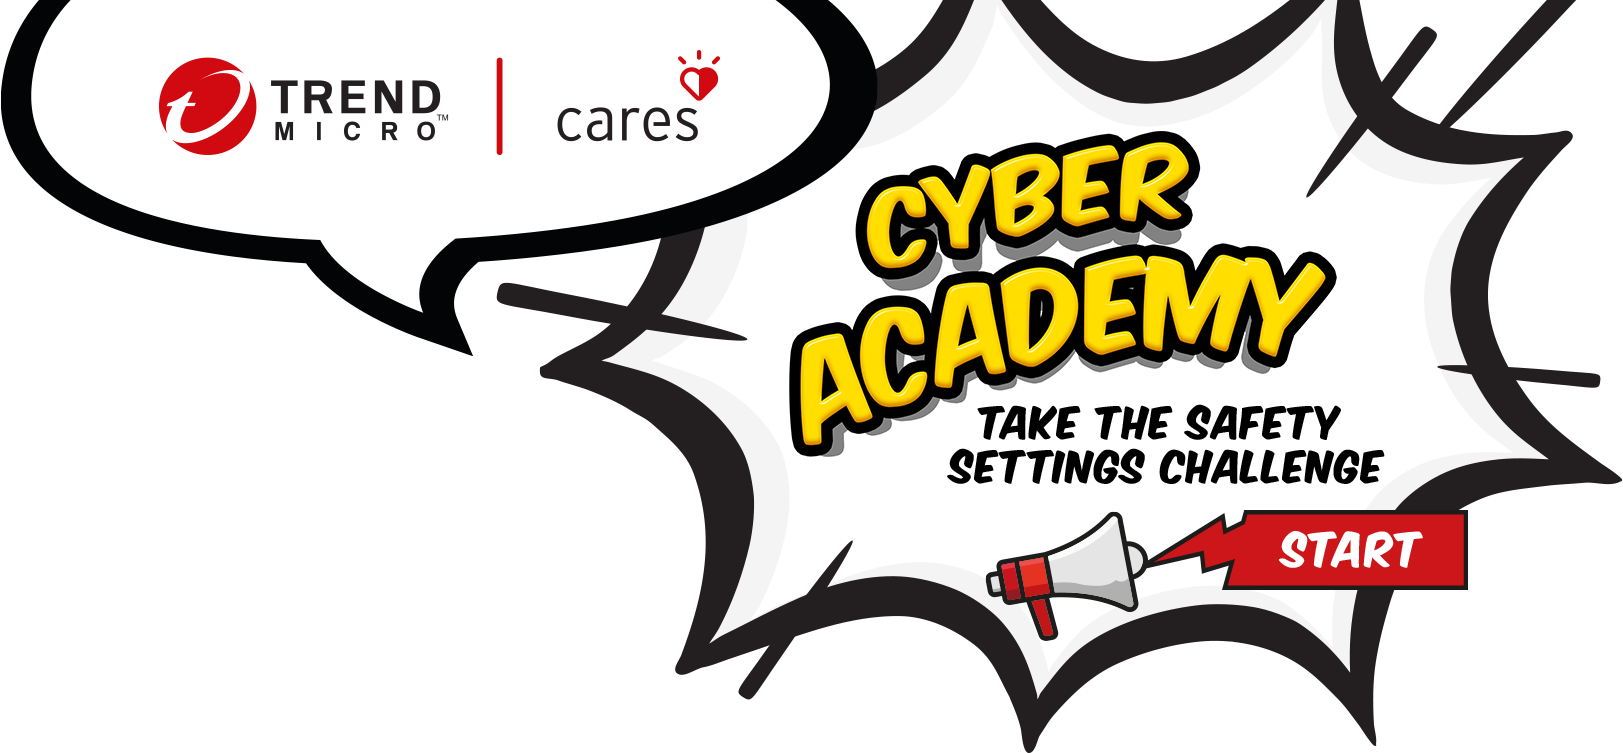 Cyber Academy- Take the safety settings challenge